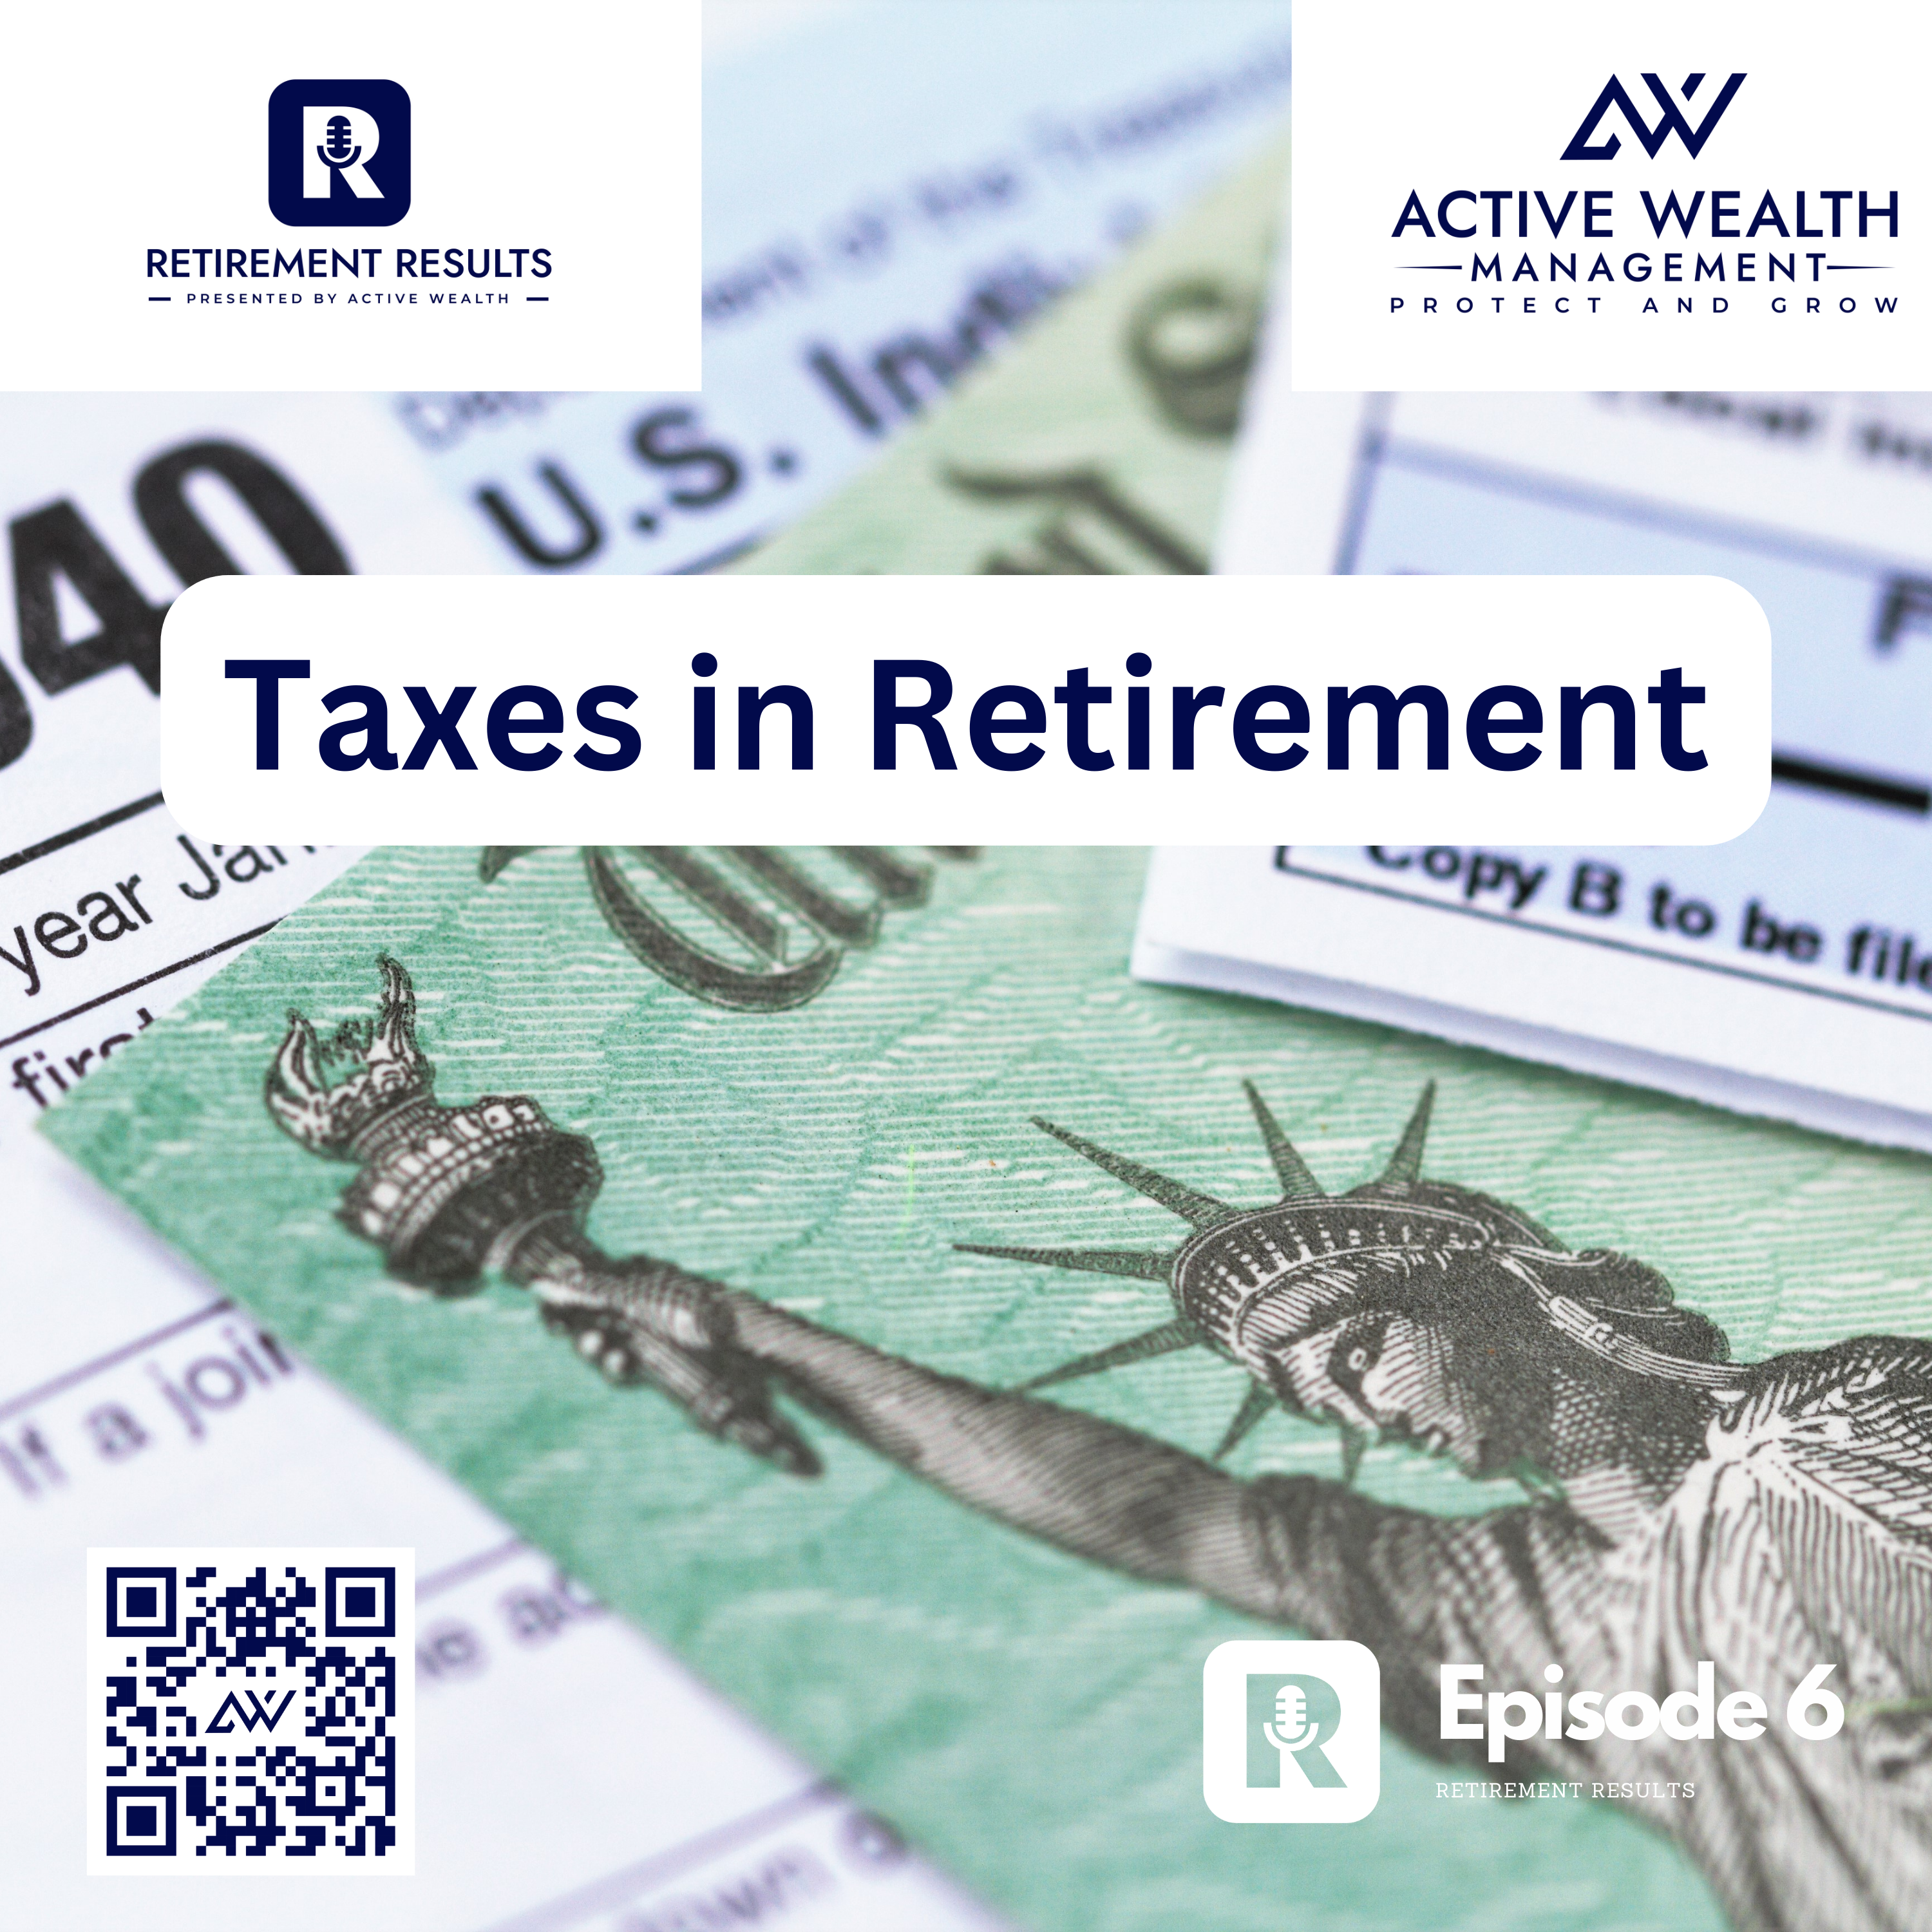 Planning Ahead for Taxes in Retirement